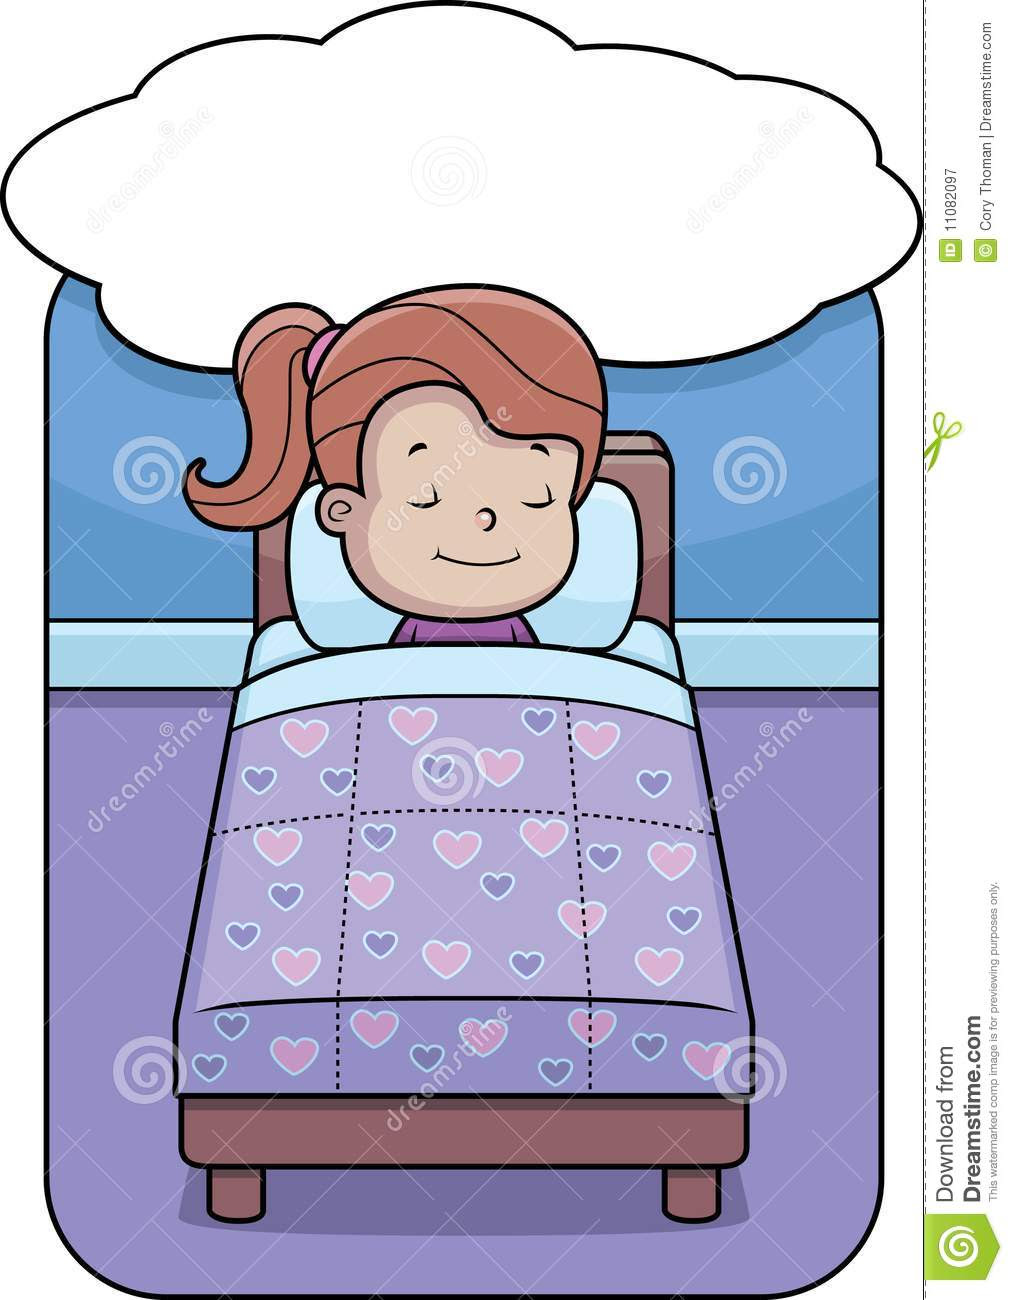 Kid Sleeping In Bed Clip Art Kid going to bed clipart kid